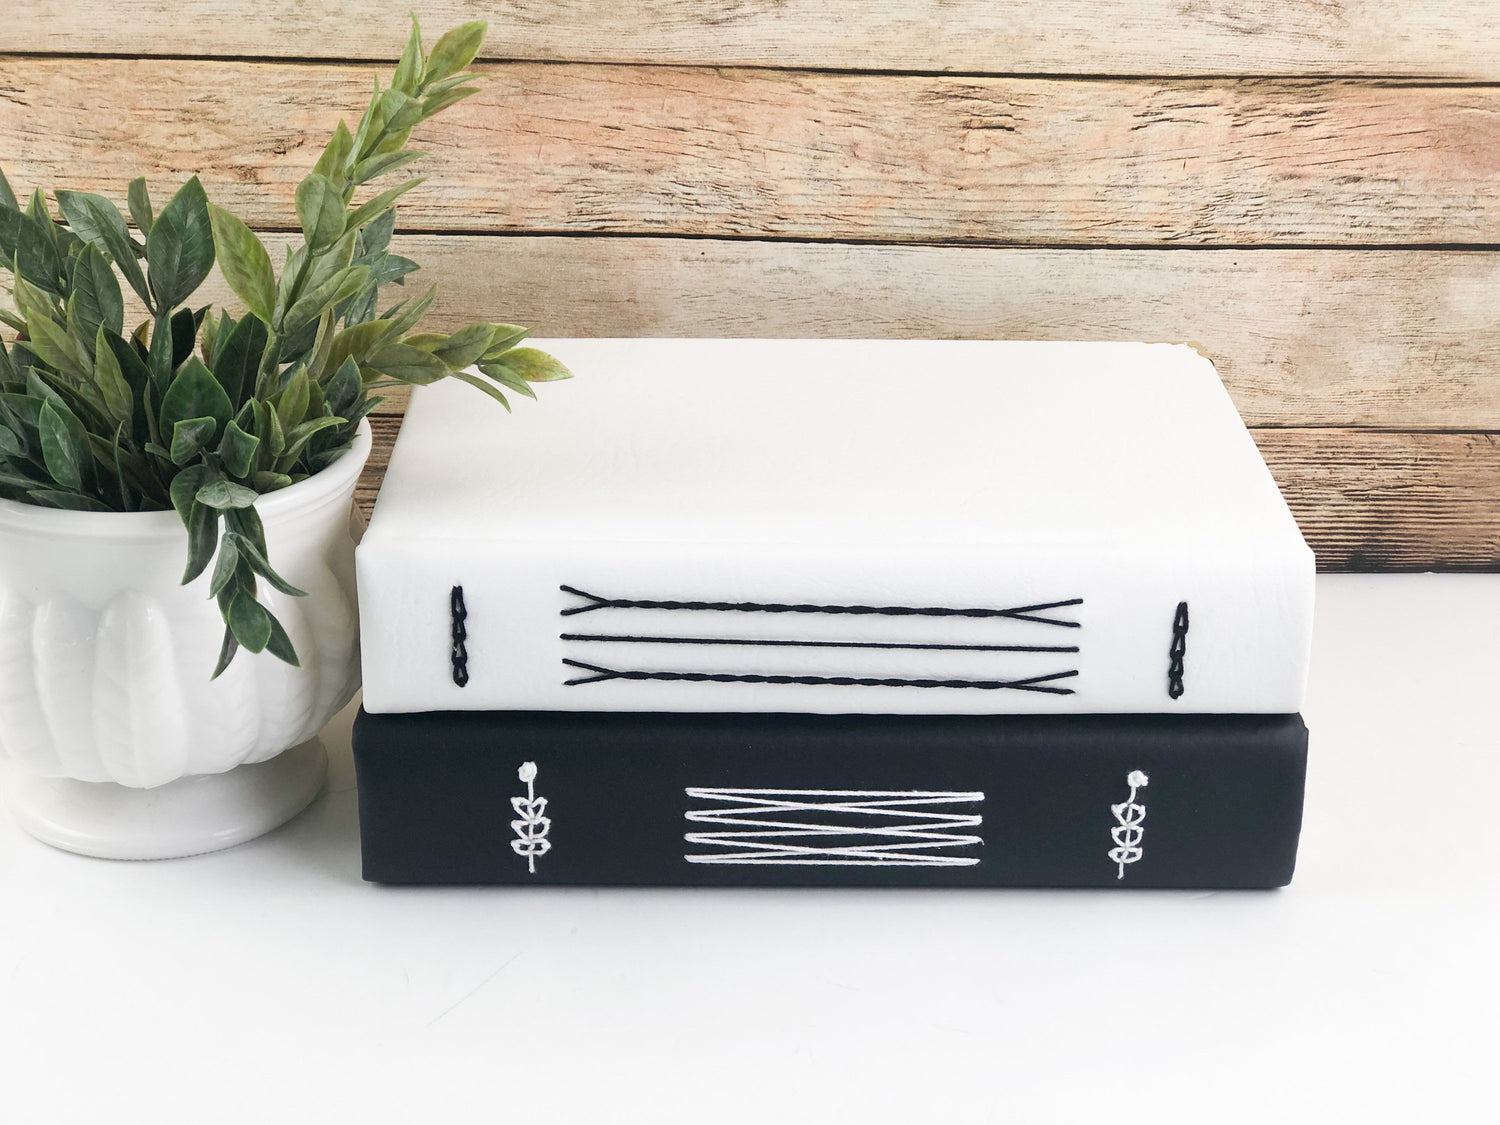 Modern Home Decor / Black and White / Embroidered Book Set